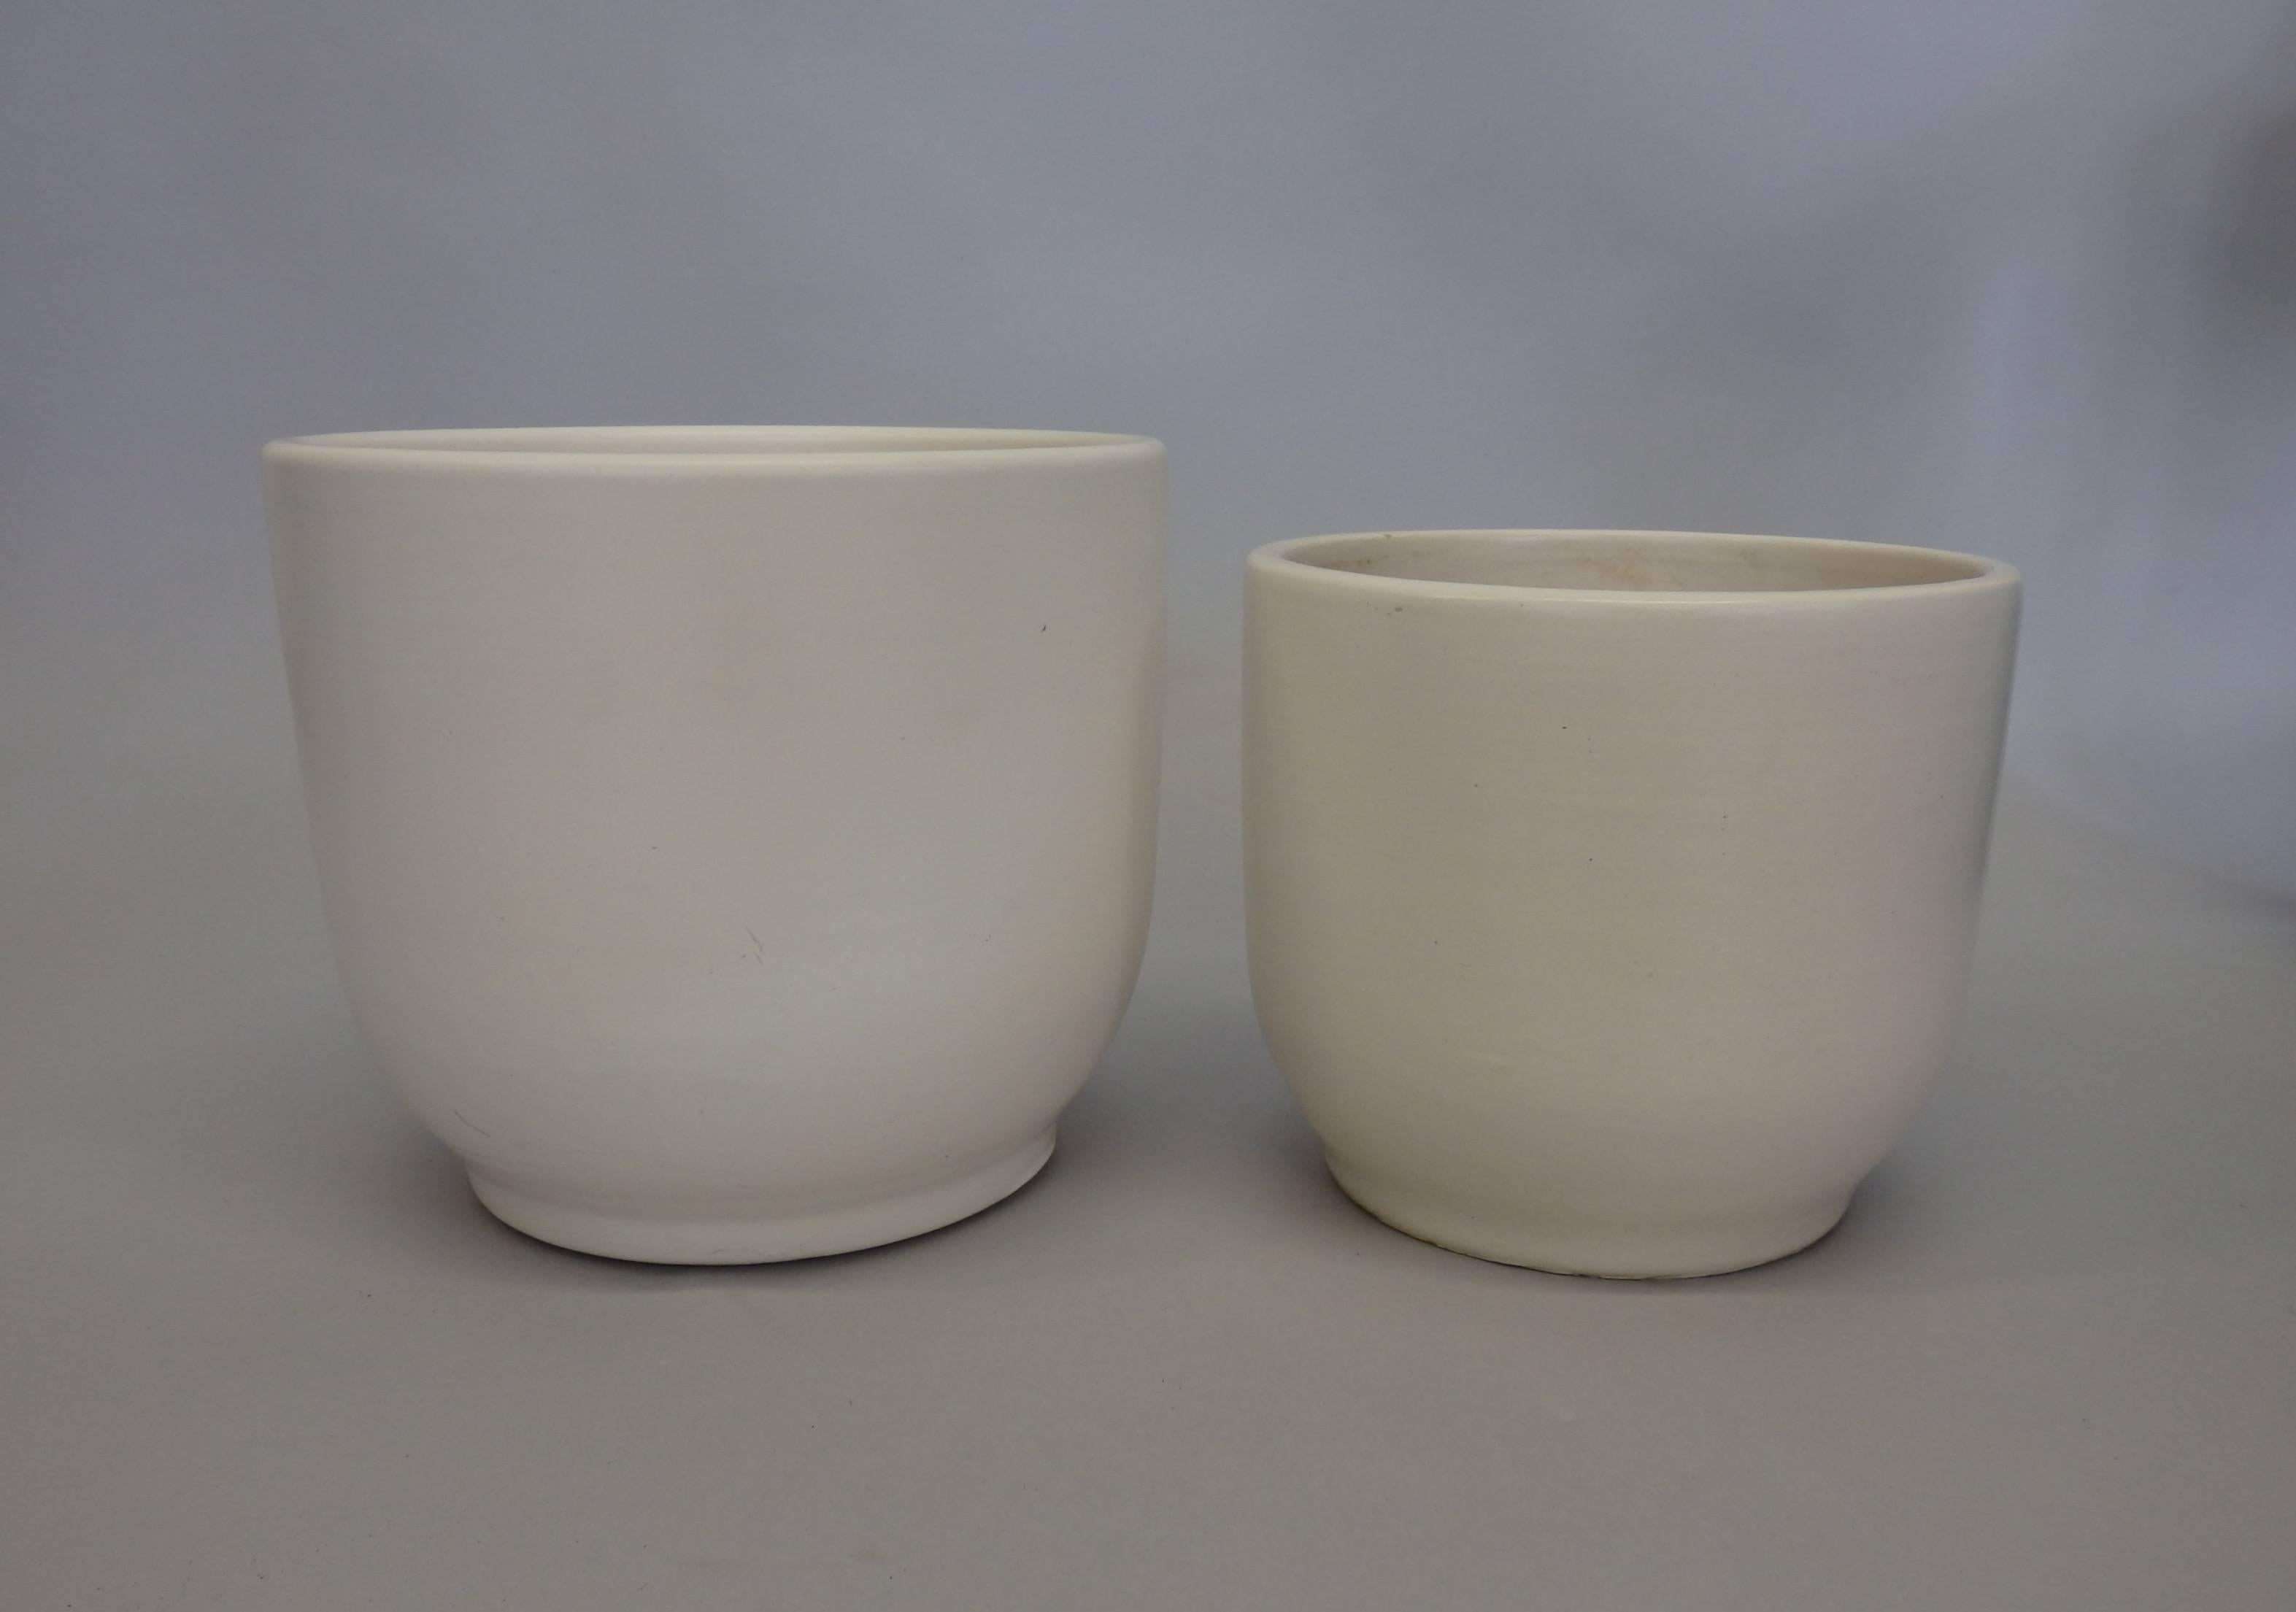 Previously used but not drilled. Excellent finish white no cracks or chips. Interior shows use.
Larger pot is 7.75 tall with 8.75 diameter . Smaller pot has 7.5 diameter at 6.5 tall